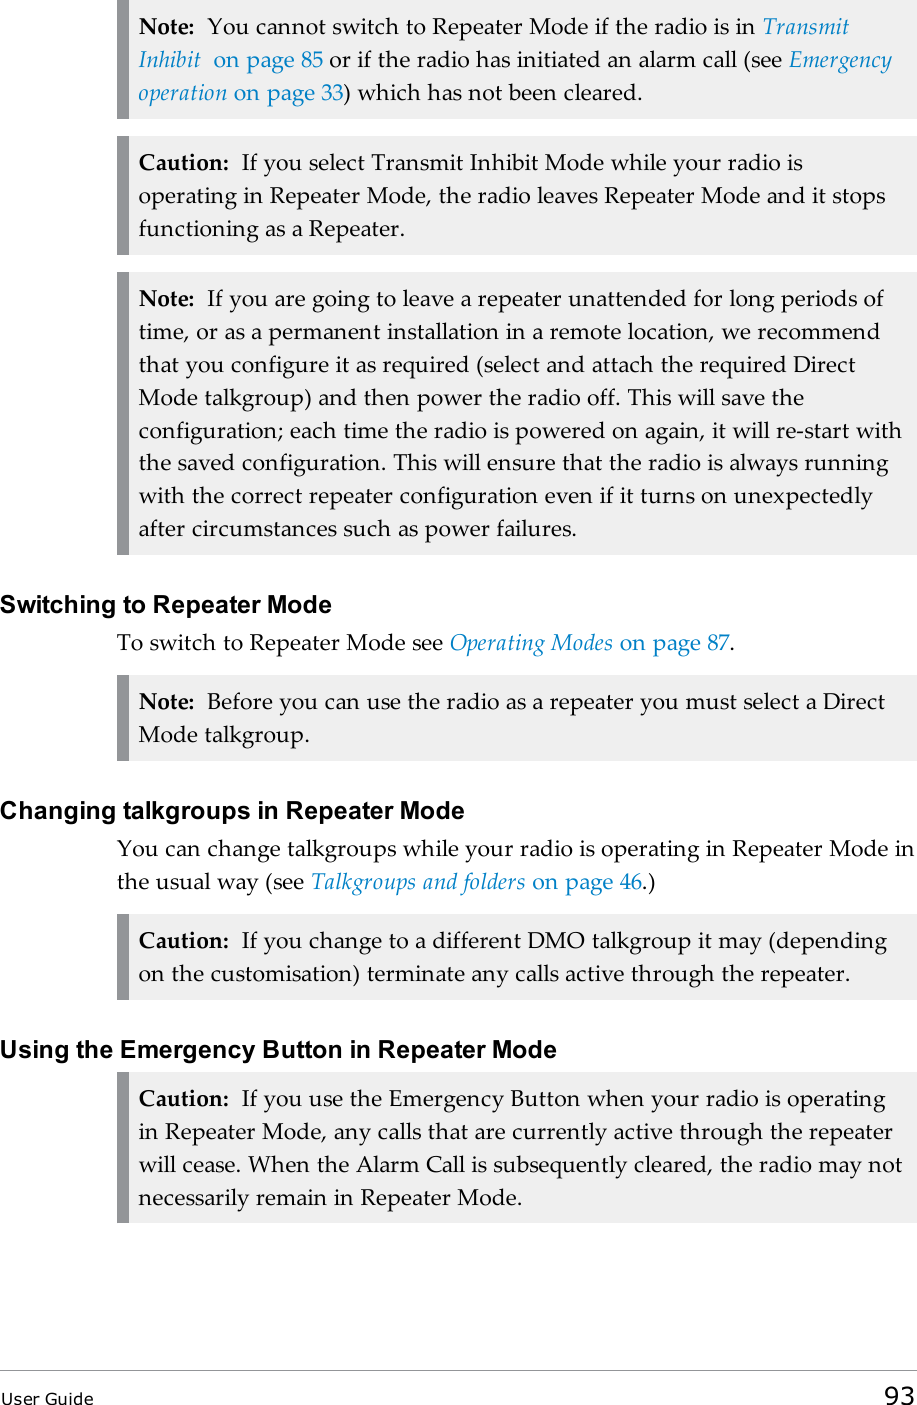 Note: You cannot switch to Repeater Mode if the radio is in TransmitInhibit on page 85 or if the radio has initiated an alarm call (see Emergencyoperation on page 33) which has not been cleared.Caution: If you select Transmit Inhibit Mode while your radio isoperating in Repeater Mode, the radio leaves Repeater Mode and it stopsfunctioning as a Repeater.Note: If you are going to leave a repeater unattended for long periods oftime, or as a permanent installation in a remote location, we recommendthat you configure it as required (select and attach the required DirectMode talkgroup) and then power the radio off. This will save theconfiguration; each time the radio is powered on again, it will re-start withthe saved configuration. This will ensure that the radio is always runningwith the correct repeater configuration even if it turns on unexpectedlyafter circumstances such as power failures.Switching to Repeater ModeTo switch to Repeater Mode see Operating Modes on page 87.Note: Before you can use the radio as a repeater you must select a DirectMode talkgroup.Changing talkgroups in Repeater ModeYou can change talkgroups while your radio is operating in Repeater Mode inthe usual way (see Talkgroups and folders on page 46.)Caution: If you change to a different DMO talkgroup it may (dependingon the customisation) terminate any calls active through the repeater.Using the Emergency Button in Repeater ModeCaution: If you use the Emergency Button when your radio is operatingin Repeater Mode, any calls that are currently active through the repeaterwill cease. When the Alarm Call is subsequently cleared, the radio may notnecessarily remain in Repeater Mode.User Guide 93